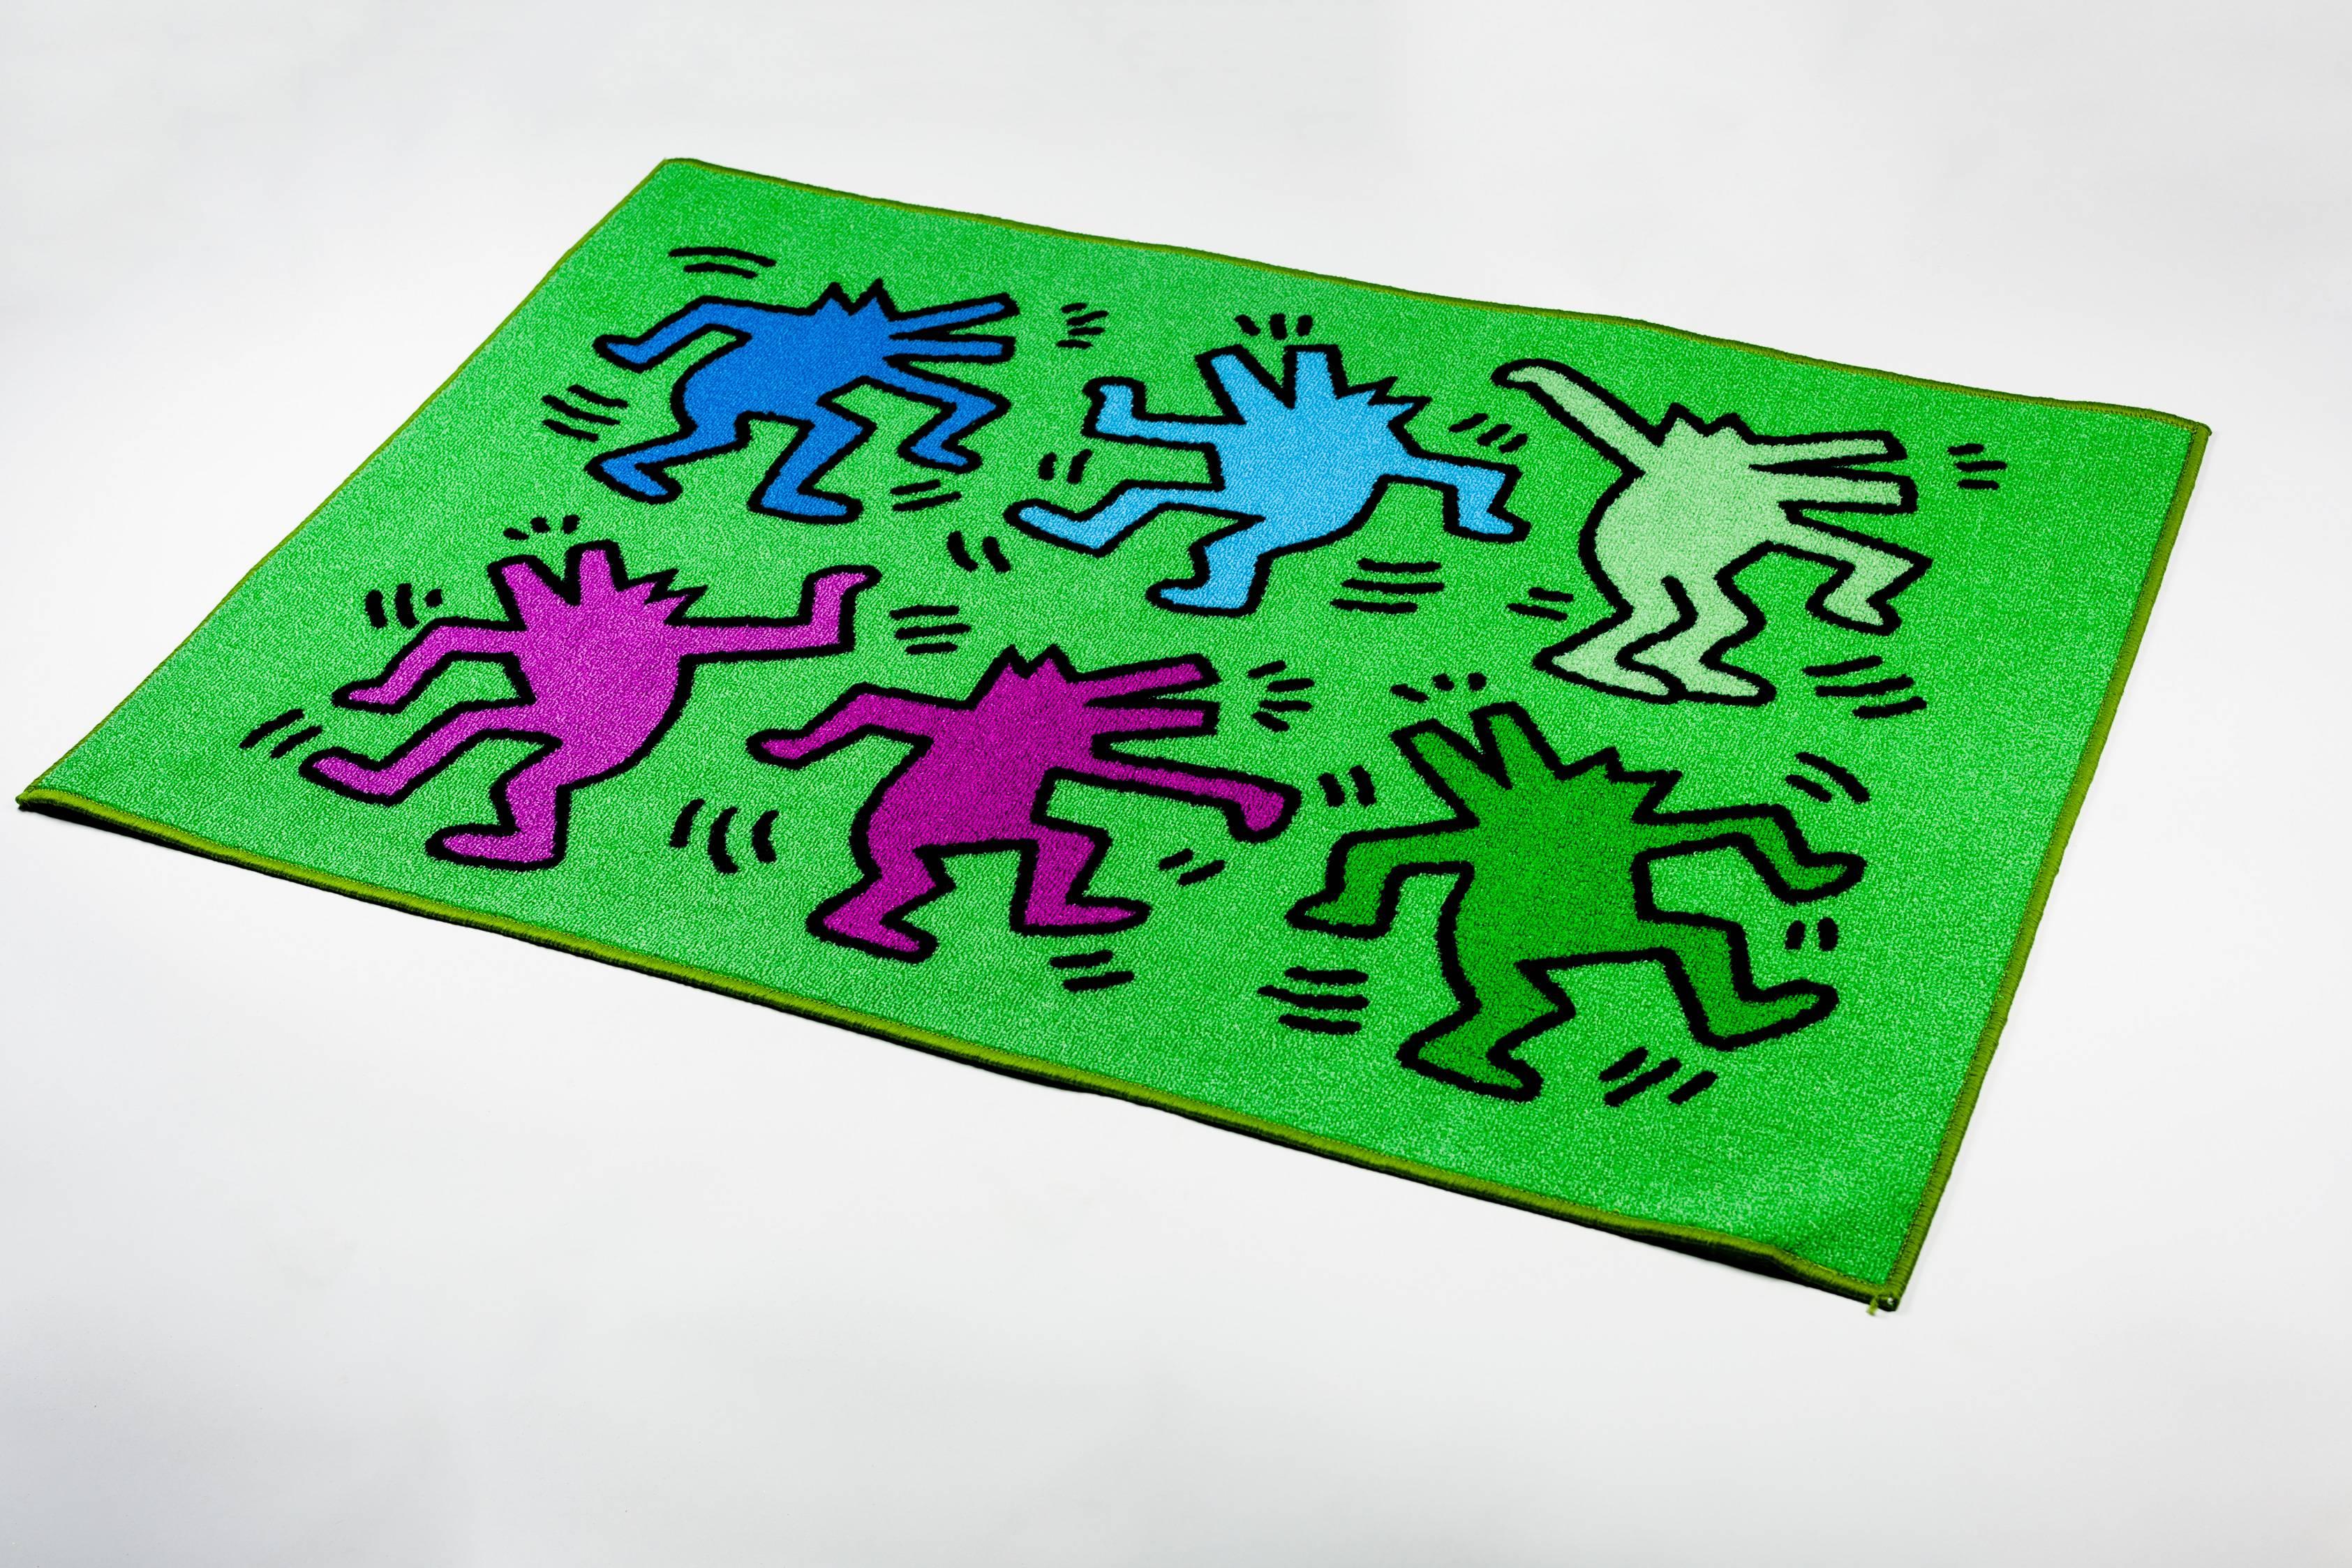 Brilliant colors green, blue and purple on this 32x47in Keith Haring rug depicting six dancing dogs, distributed by Comart Italia. Copyright Keith Haring Foundation, licensed by Artestar, New York. New old stock, in packaging. For anyone who admires